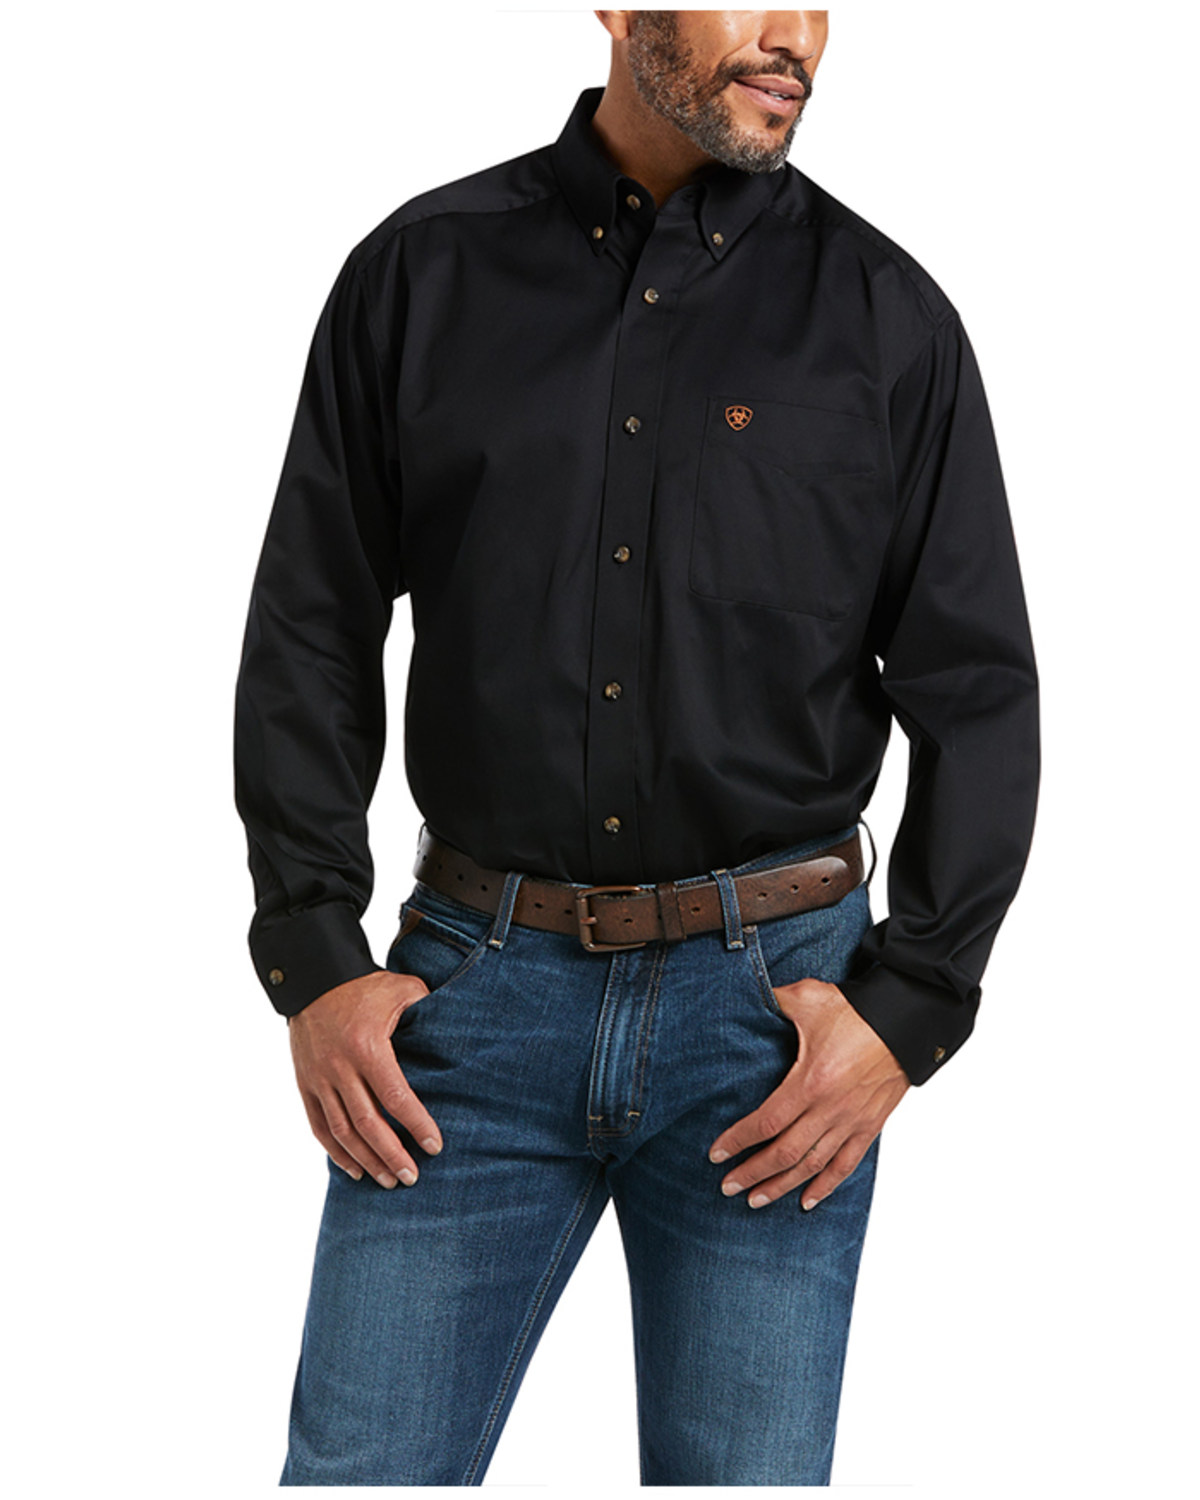 Ariat Men's Solid Twill Long Sleeve Western Woven Shirt